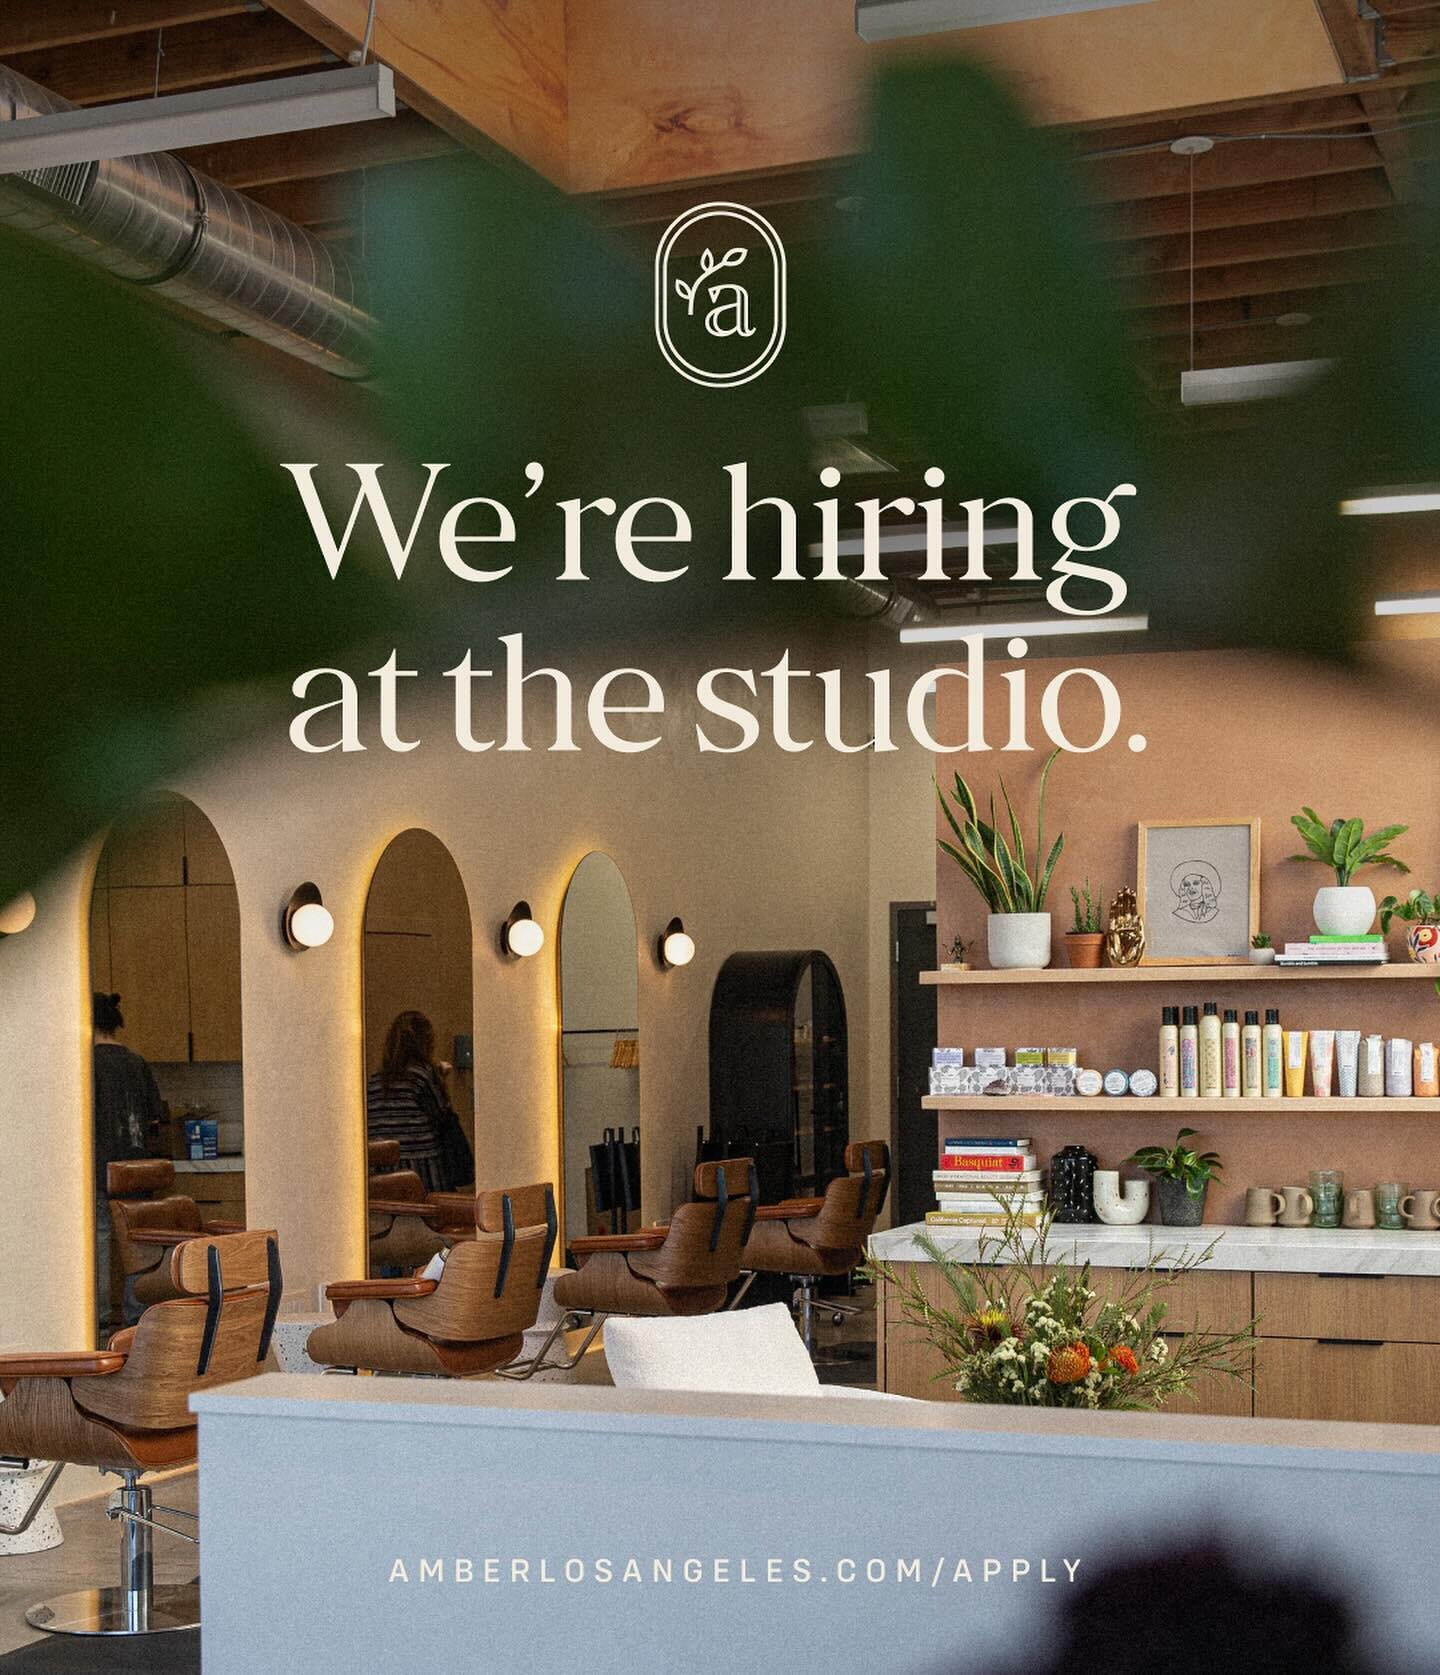 Calling all talented stylists/colorists based in LA.

Are you passionate about exceeding client expectations and creating unforgettable experiences? Do you thrive on making people look and feel their best, while also sharing our commitment to using t